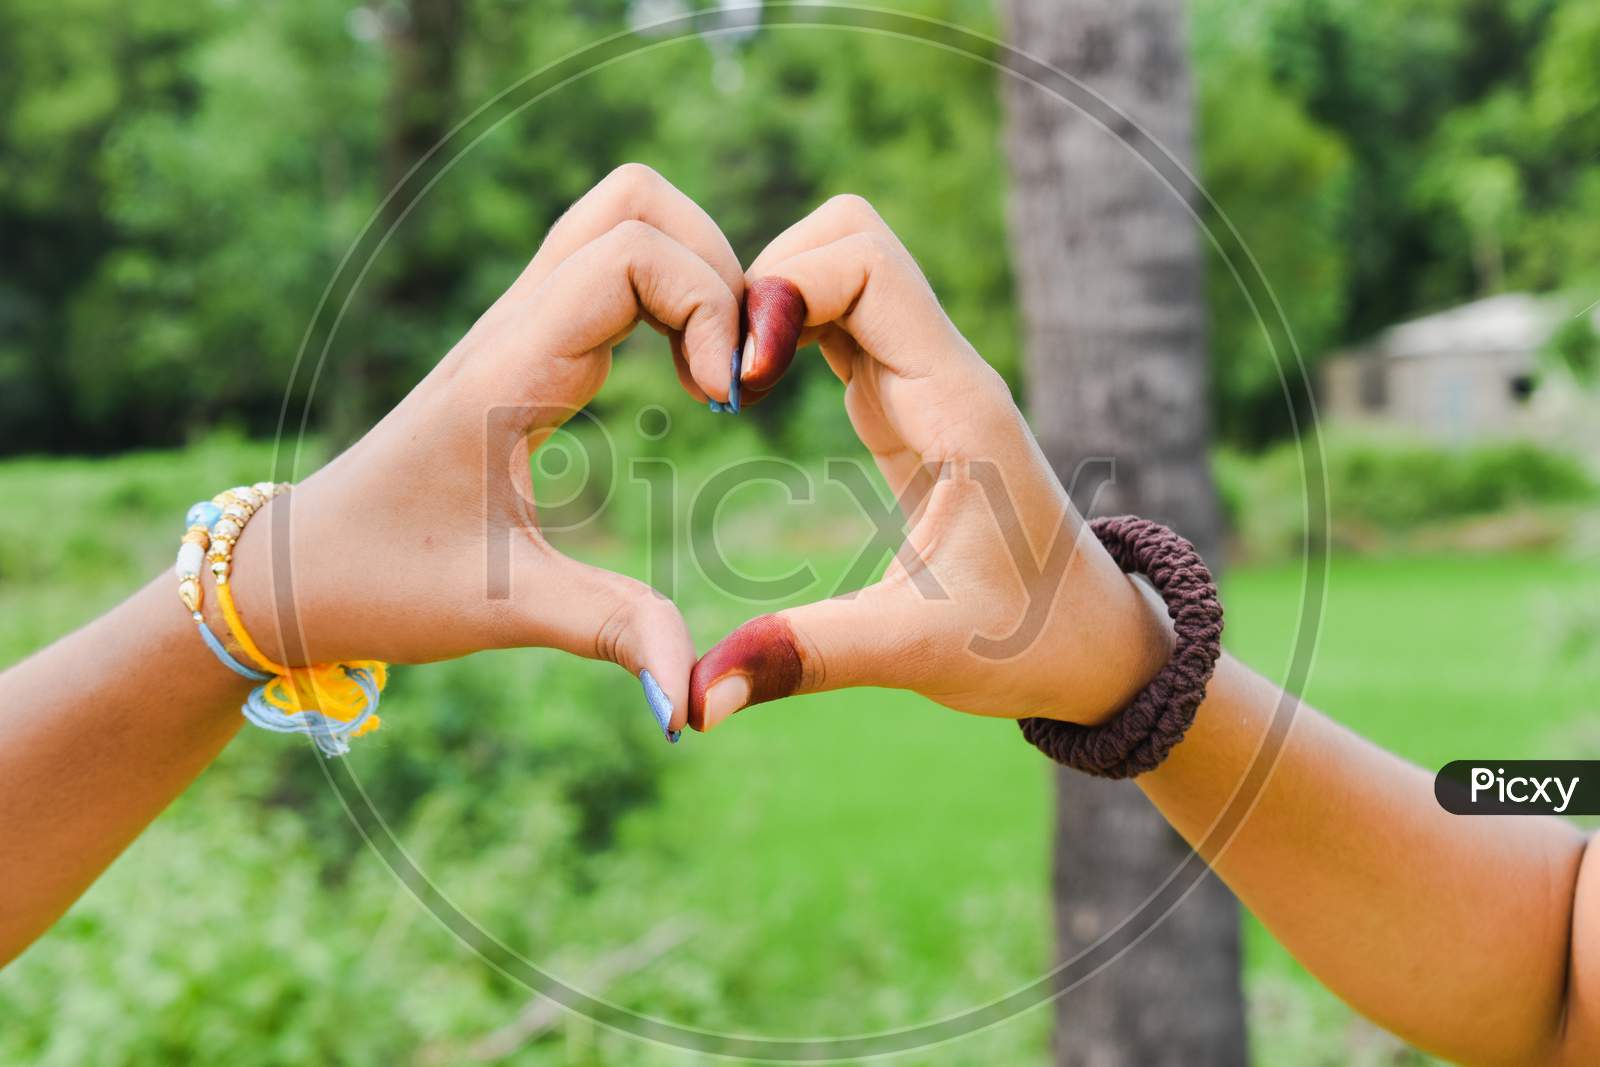 Heart shape with hands